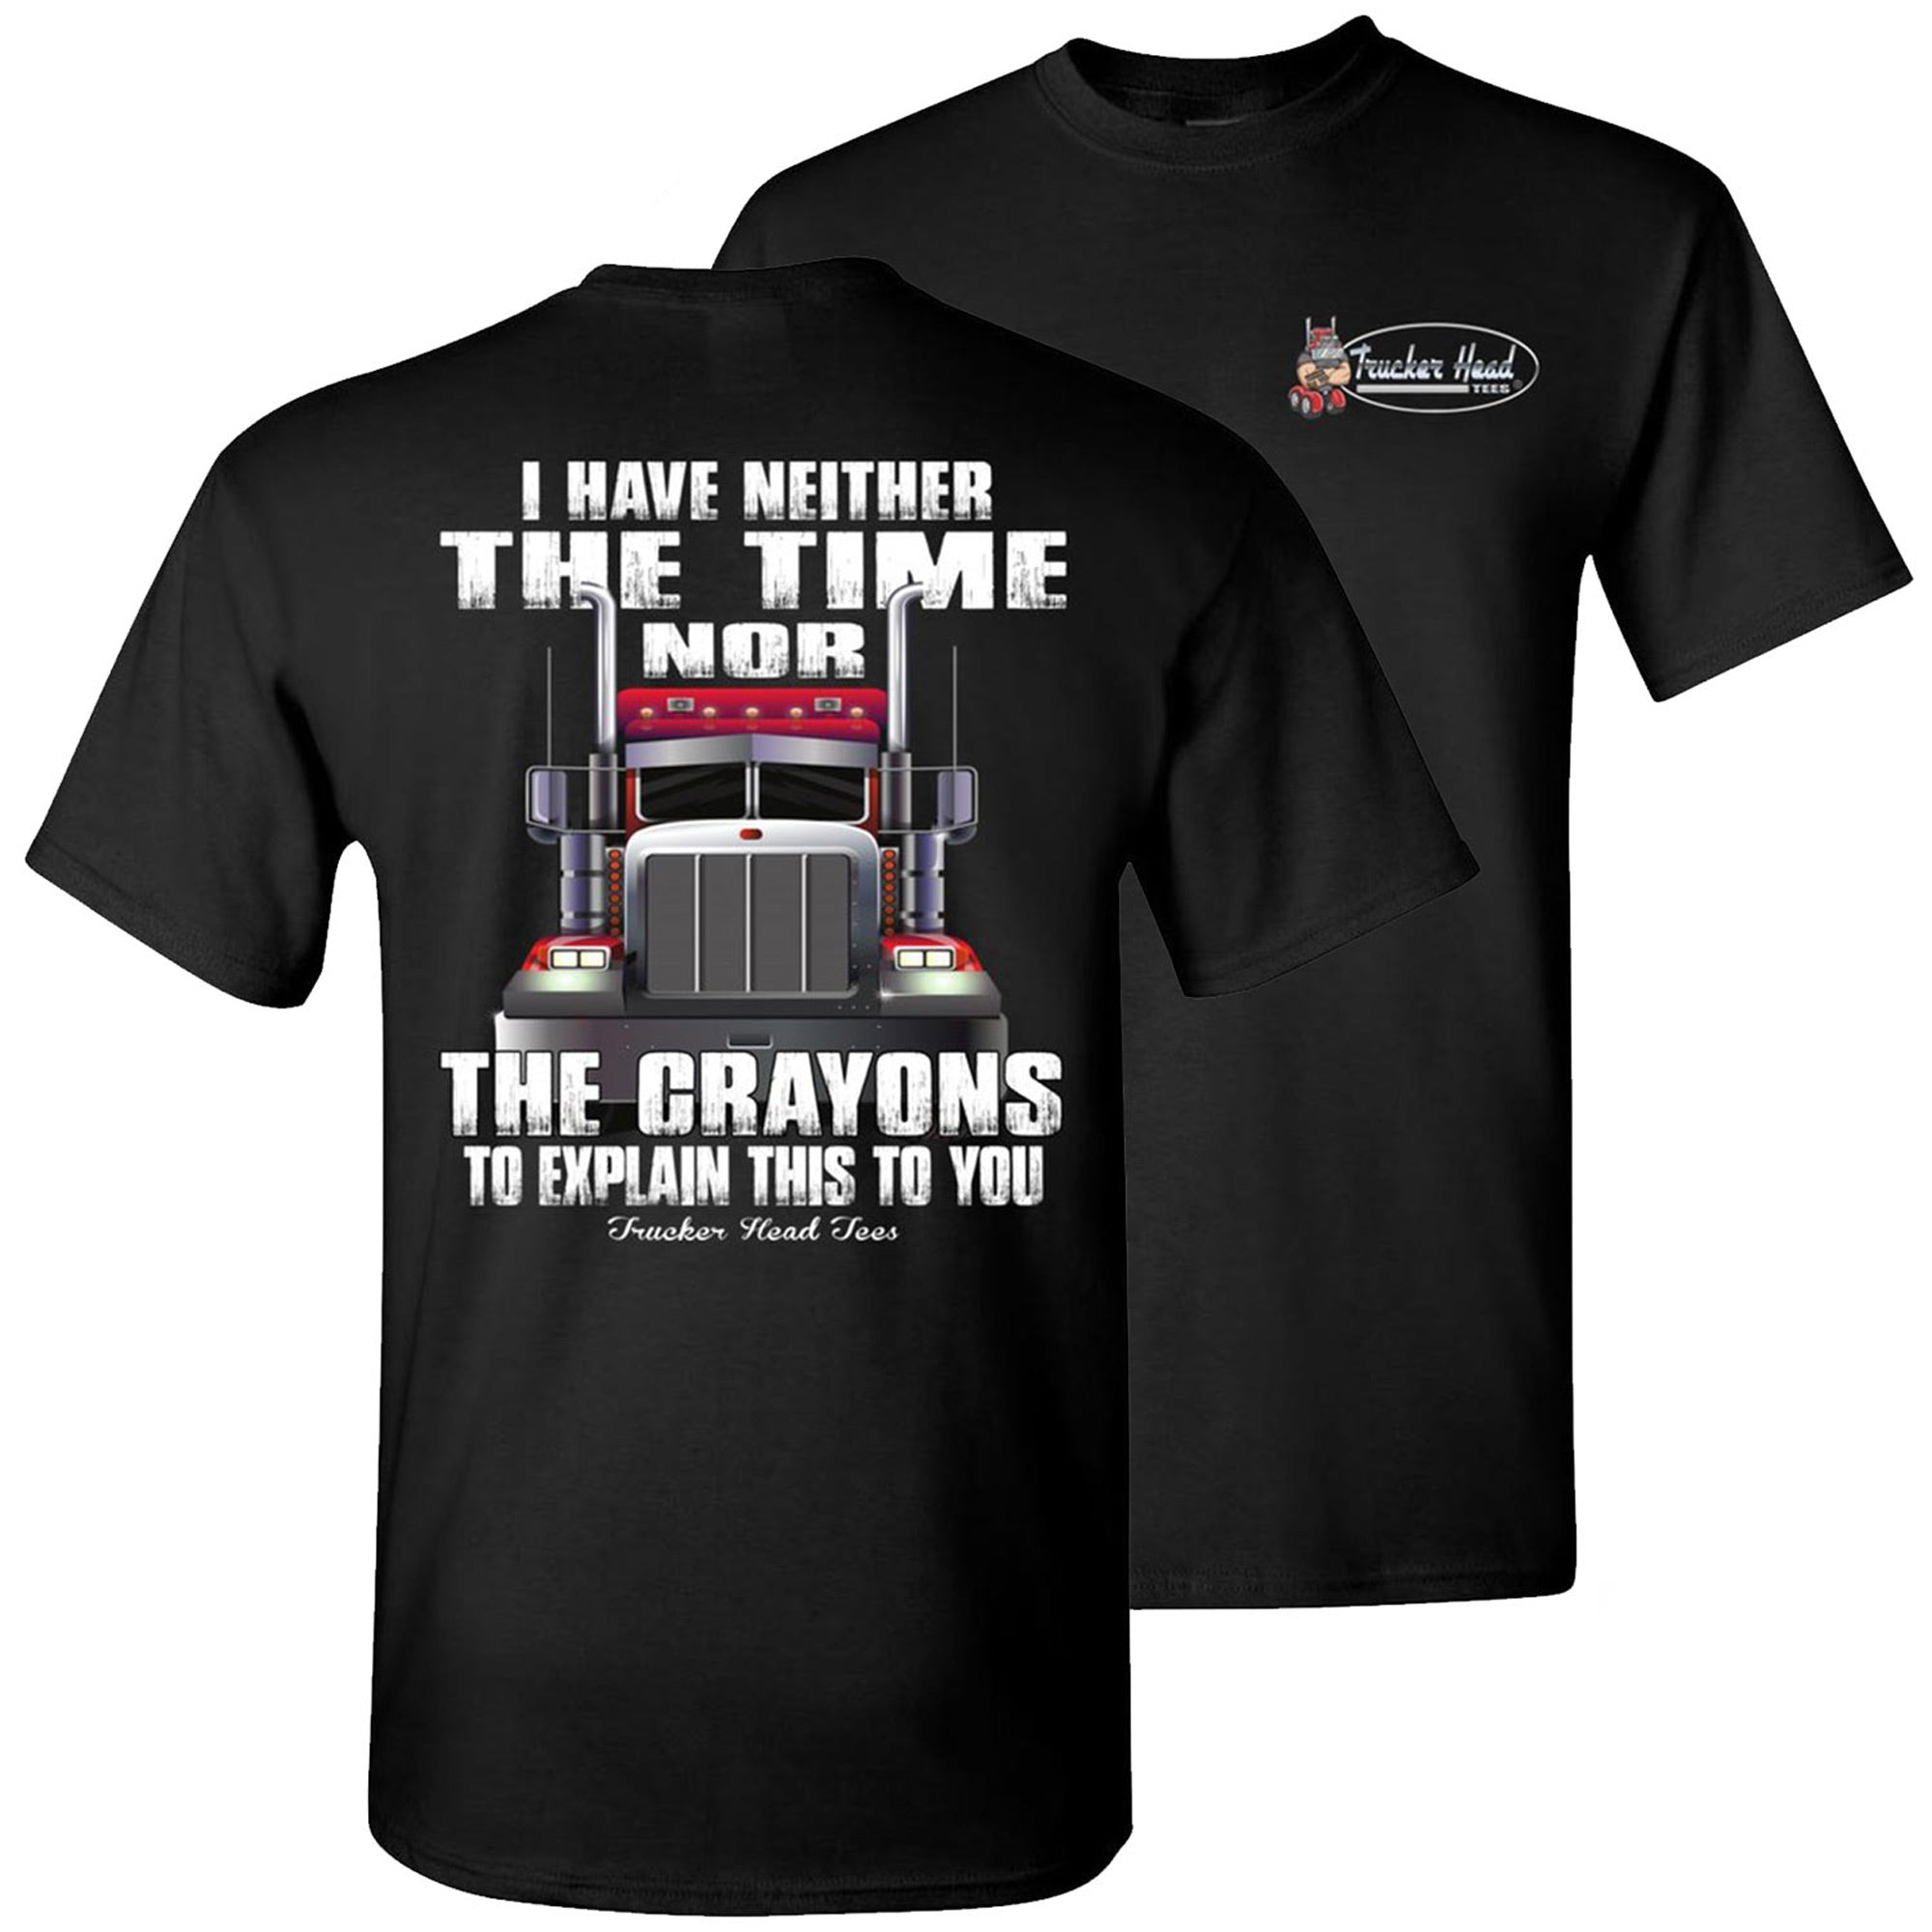 Without Trucks Everything Stops Support Truck Drivers T-Shirt - TeeNavi